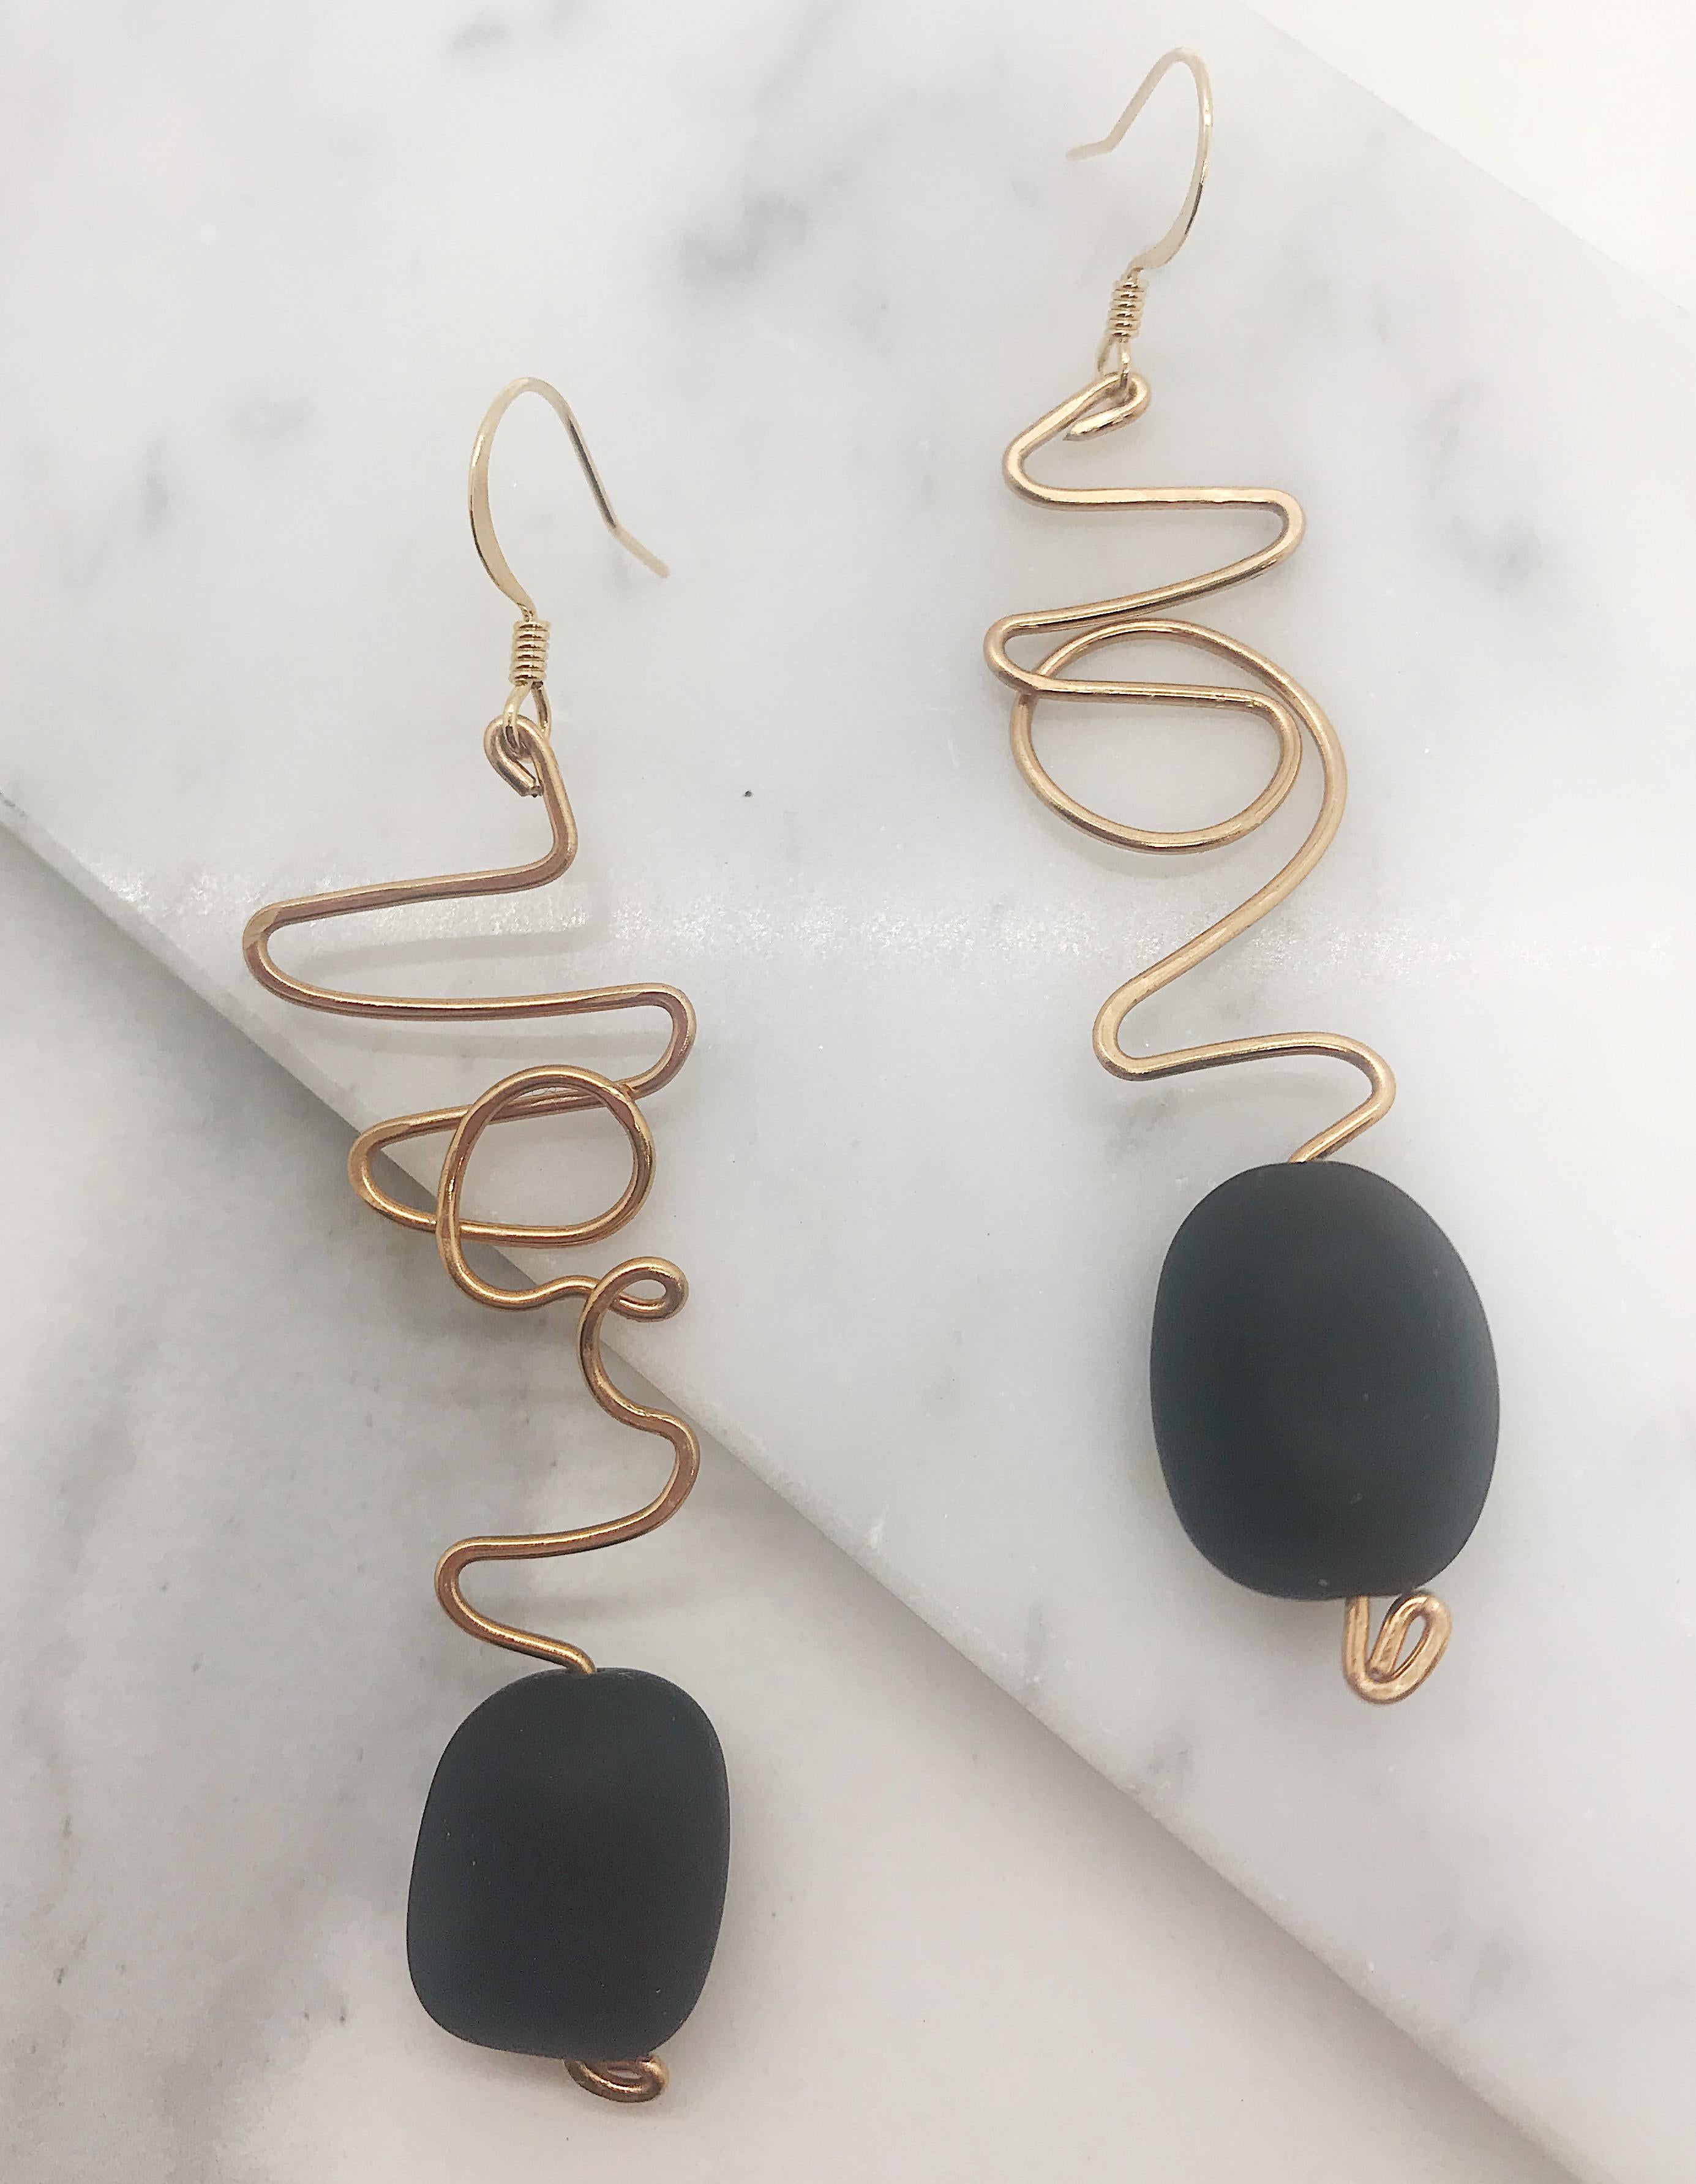 Contemporary Eclipse Earrings featuring matte black seas glass by Sidney Cherie Studio.  For Sale